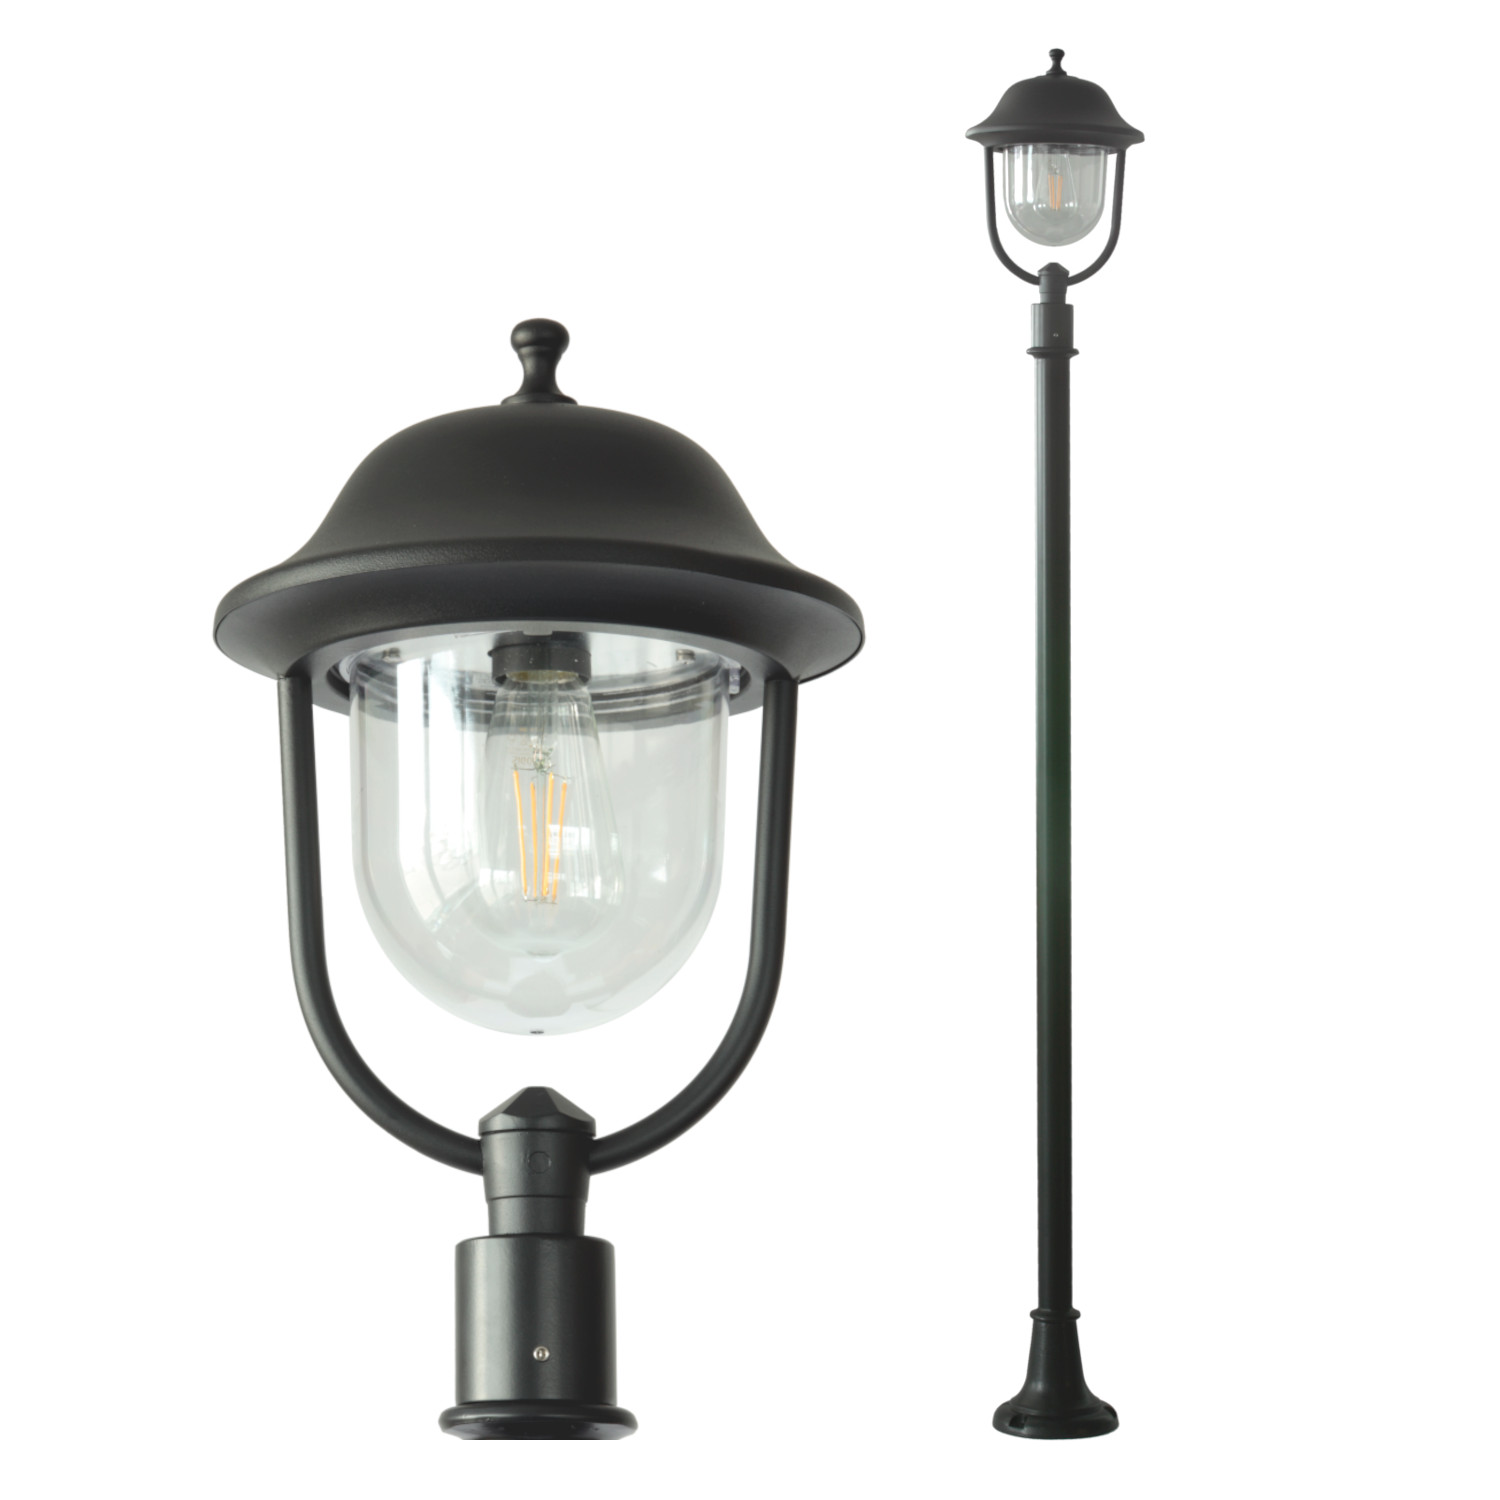 Post Light With Round Top Mount Lantern PadwaXL.39